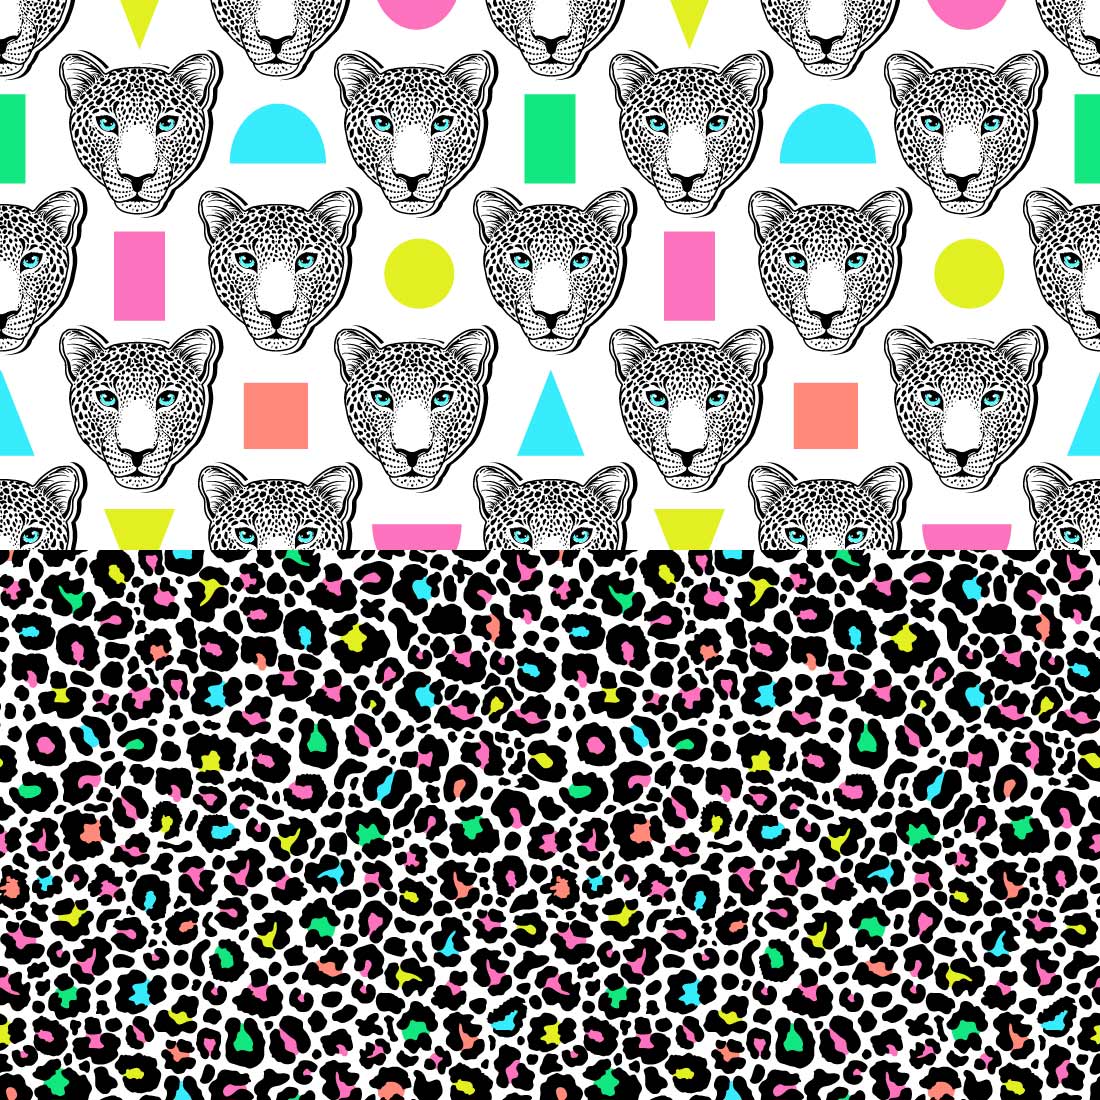 Leopard patterns preview image.